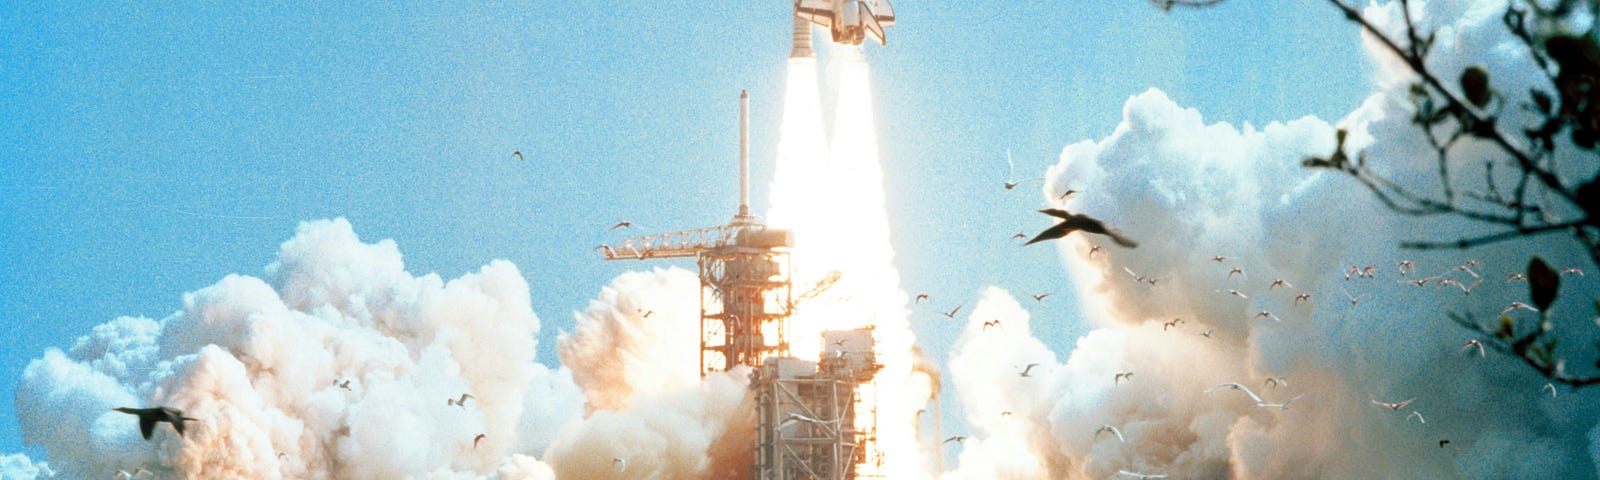 Space shuttle launching from Cape Canaveral.